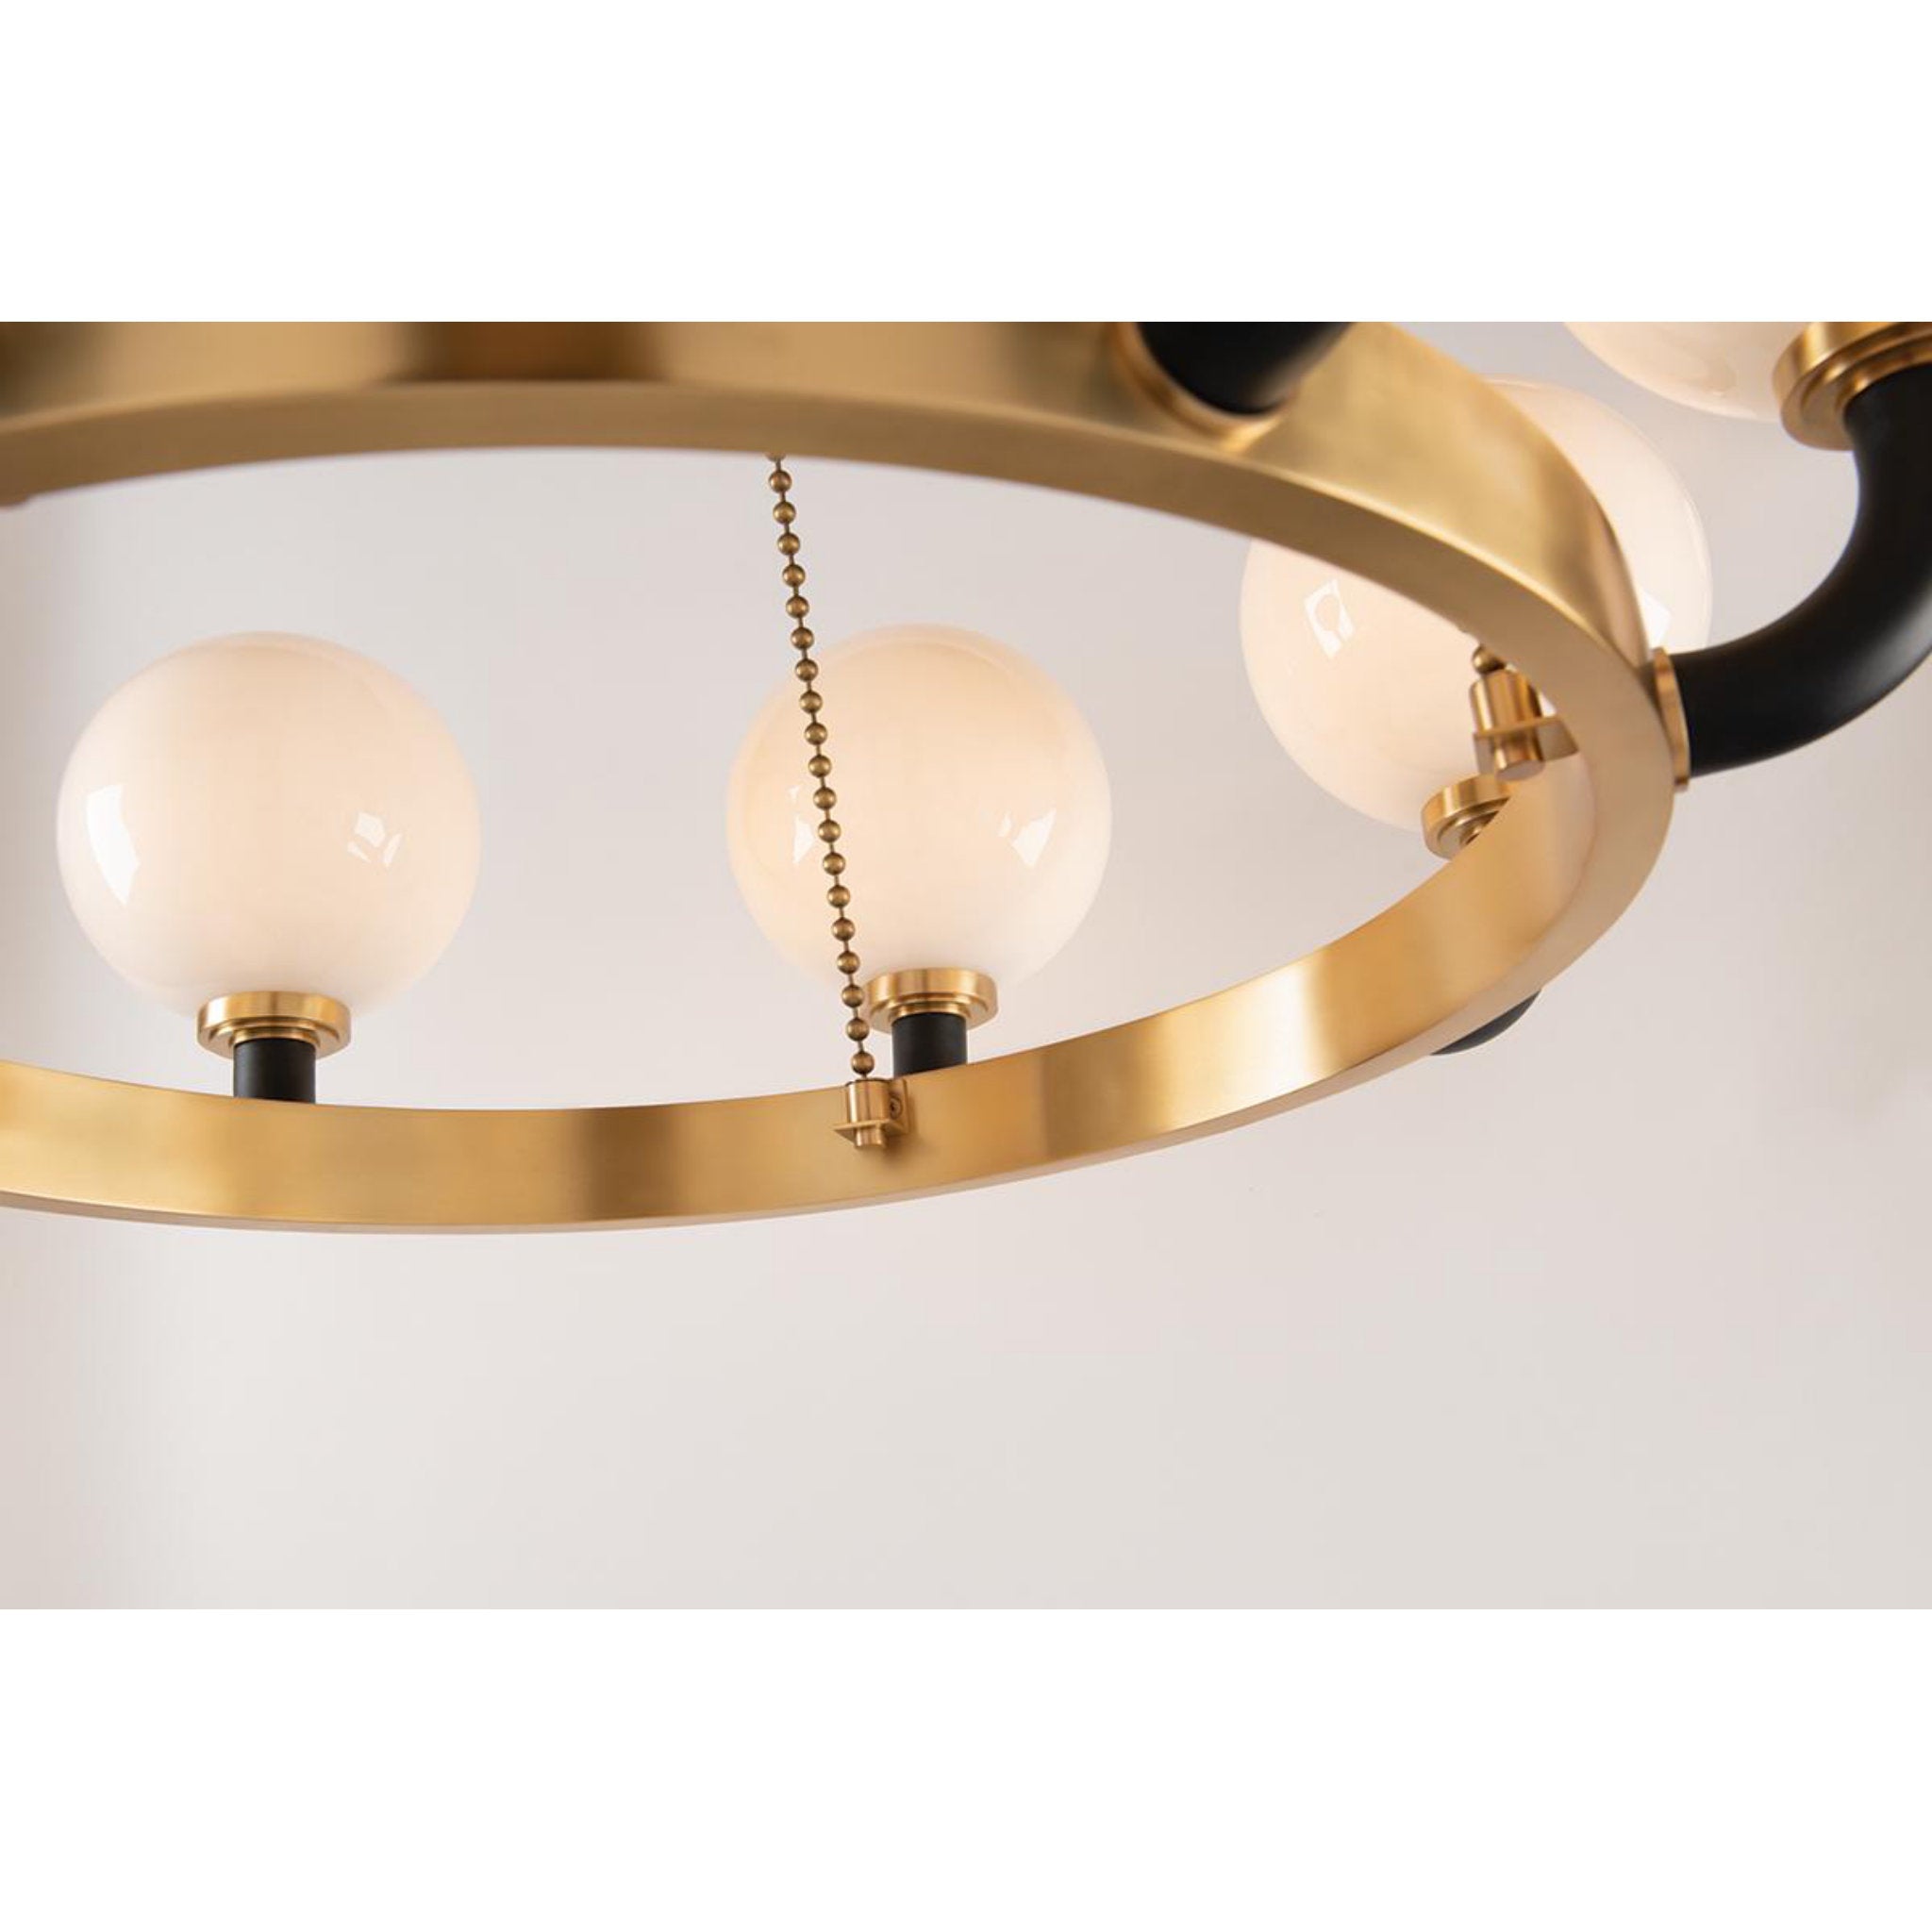 Werner 1 Light Wall Sconce in Aged Brass/black